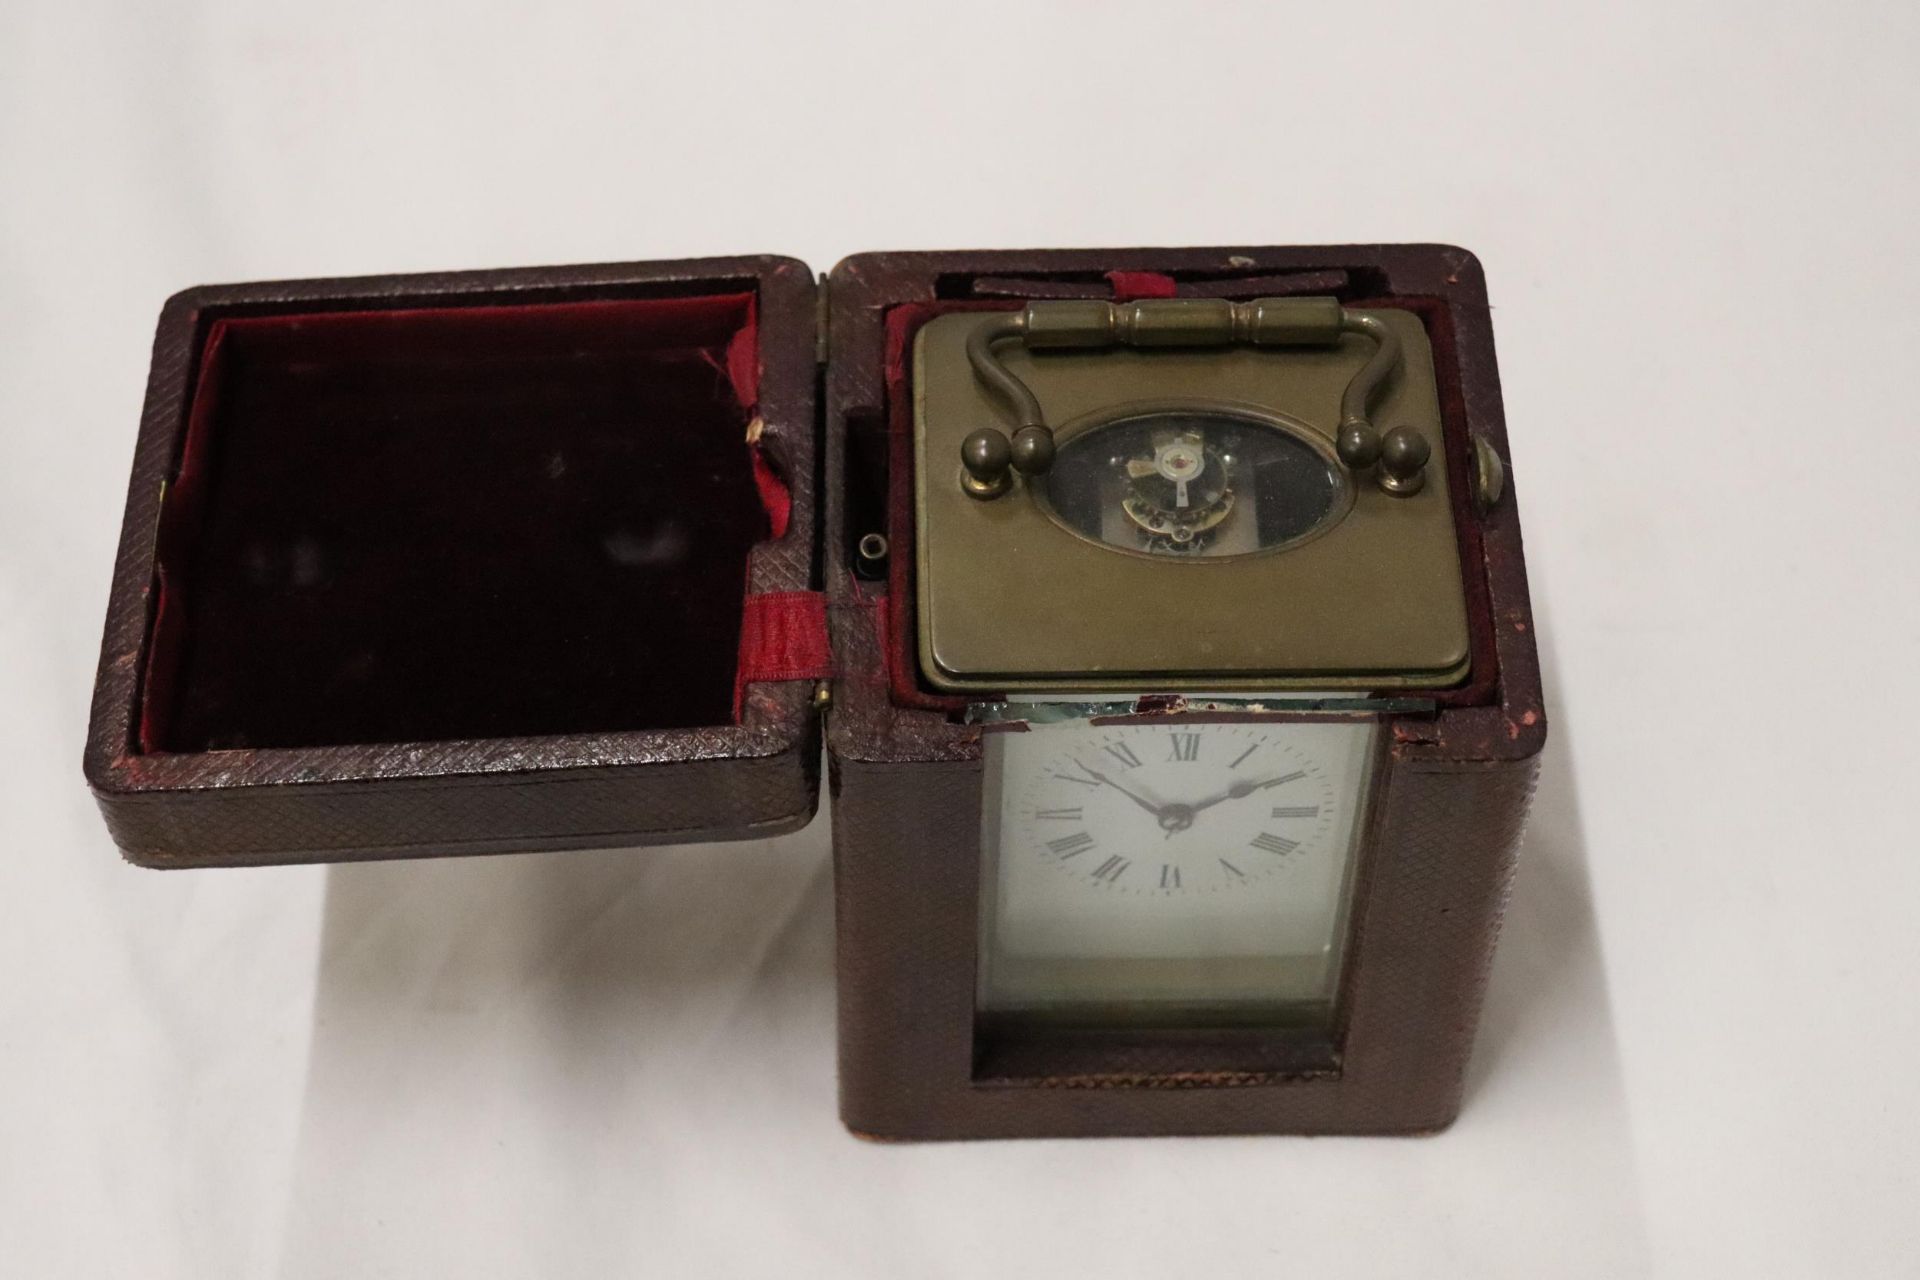 A VINTAGE BRASS ALARM CLOCK WITH GLASS SIDES TO SHOW INNER WORKINGS, IN A LEATHER CASE - Image 3 of 11